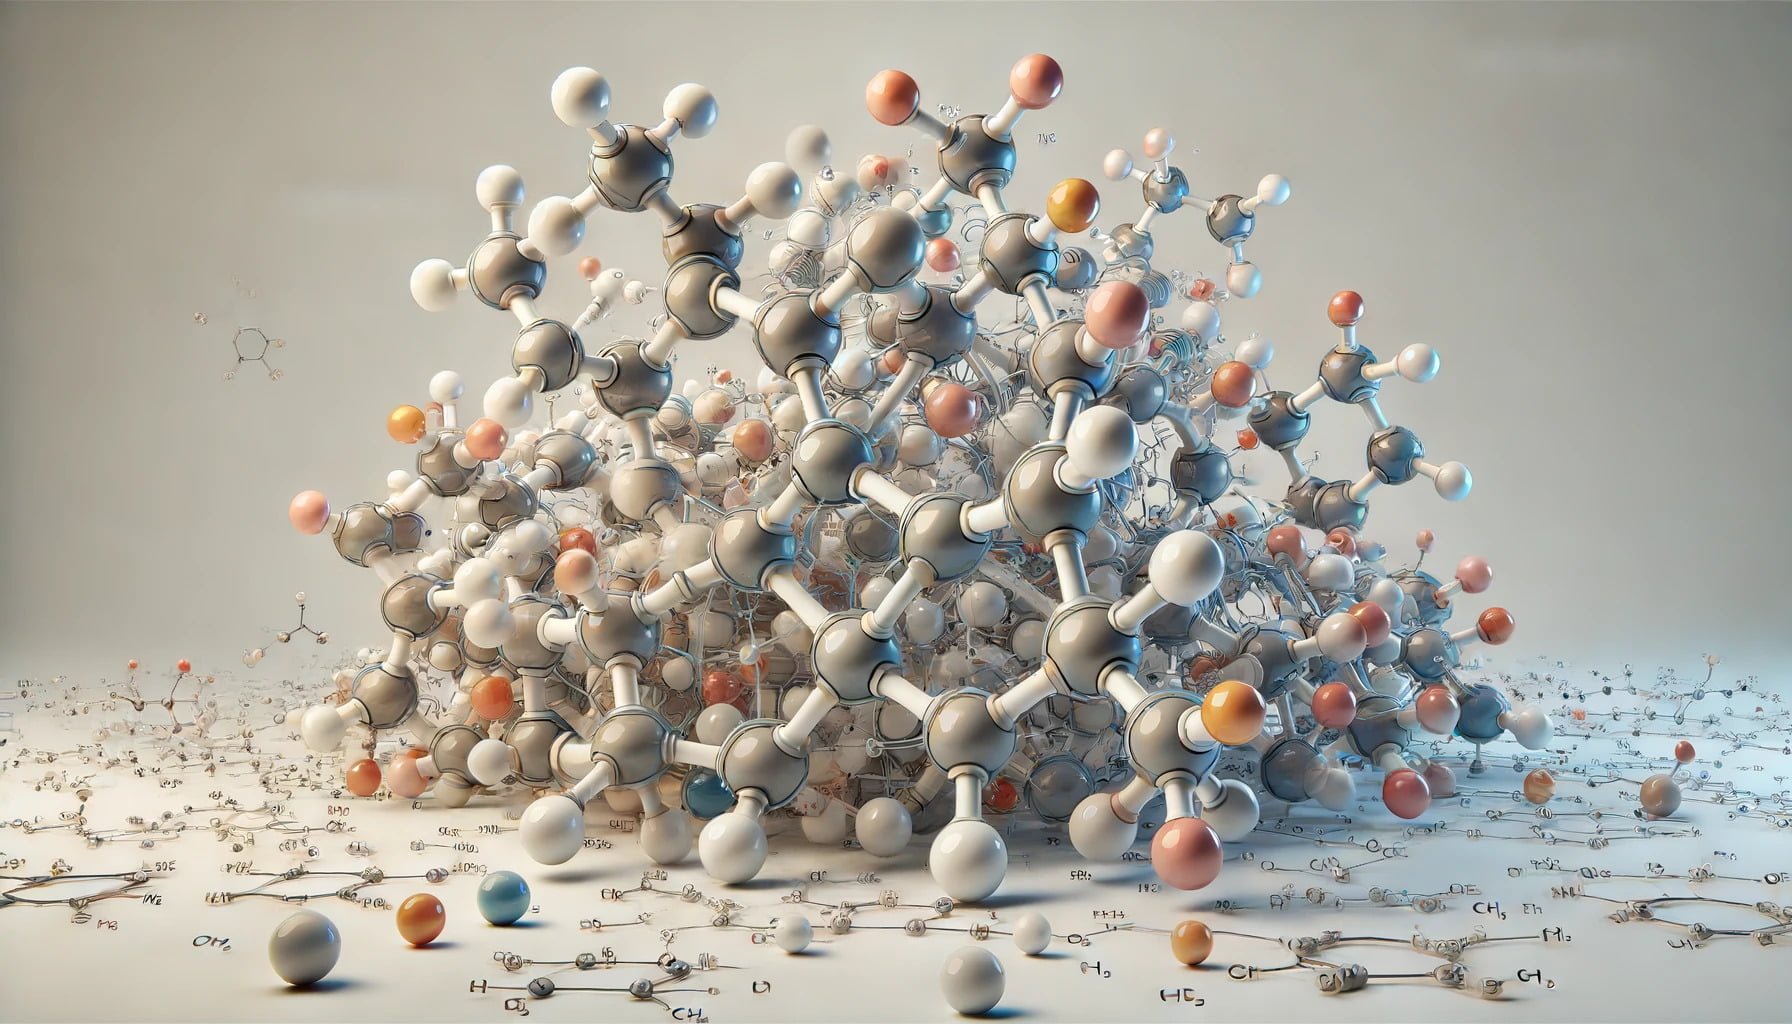 A photorealistic image of a detailed molecular structure model of vitamin d.